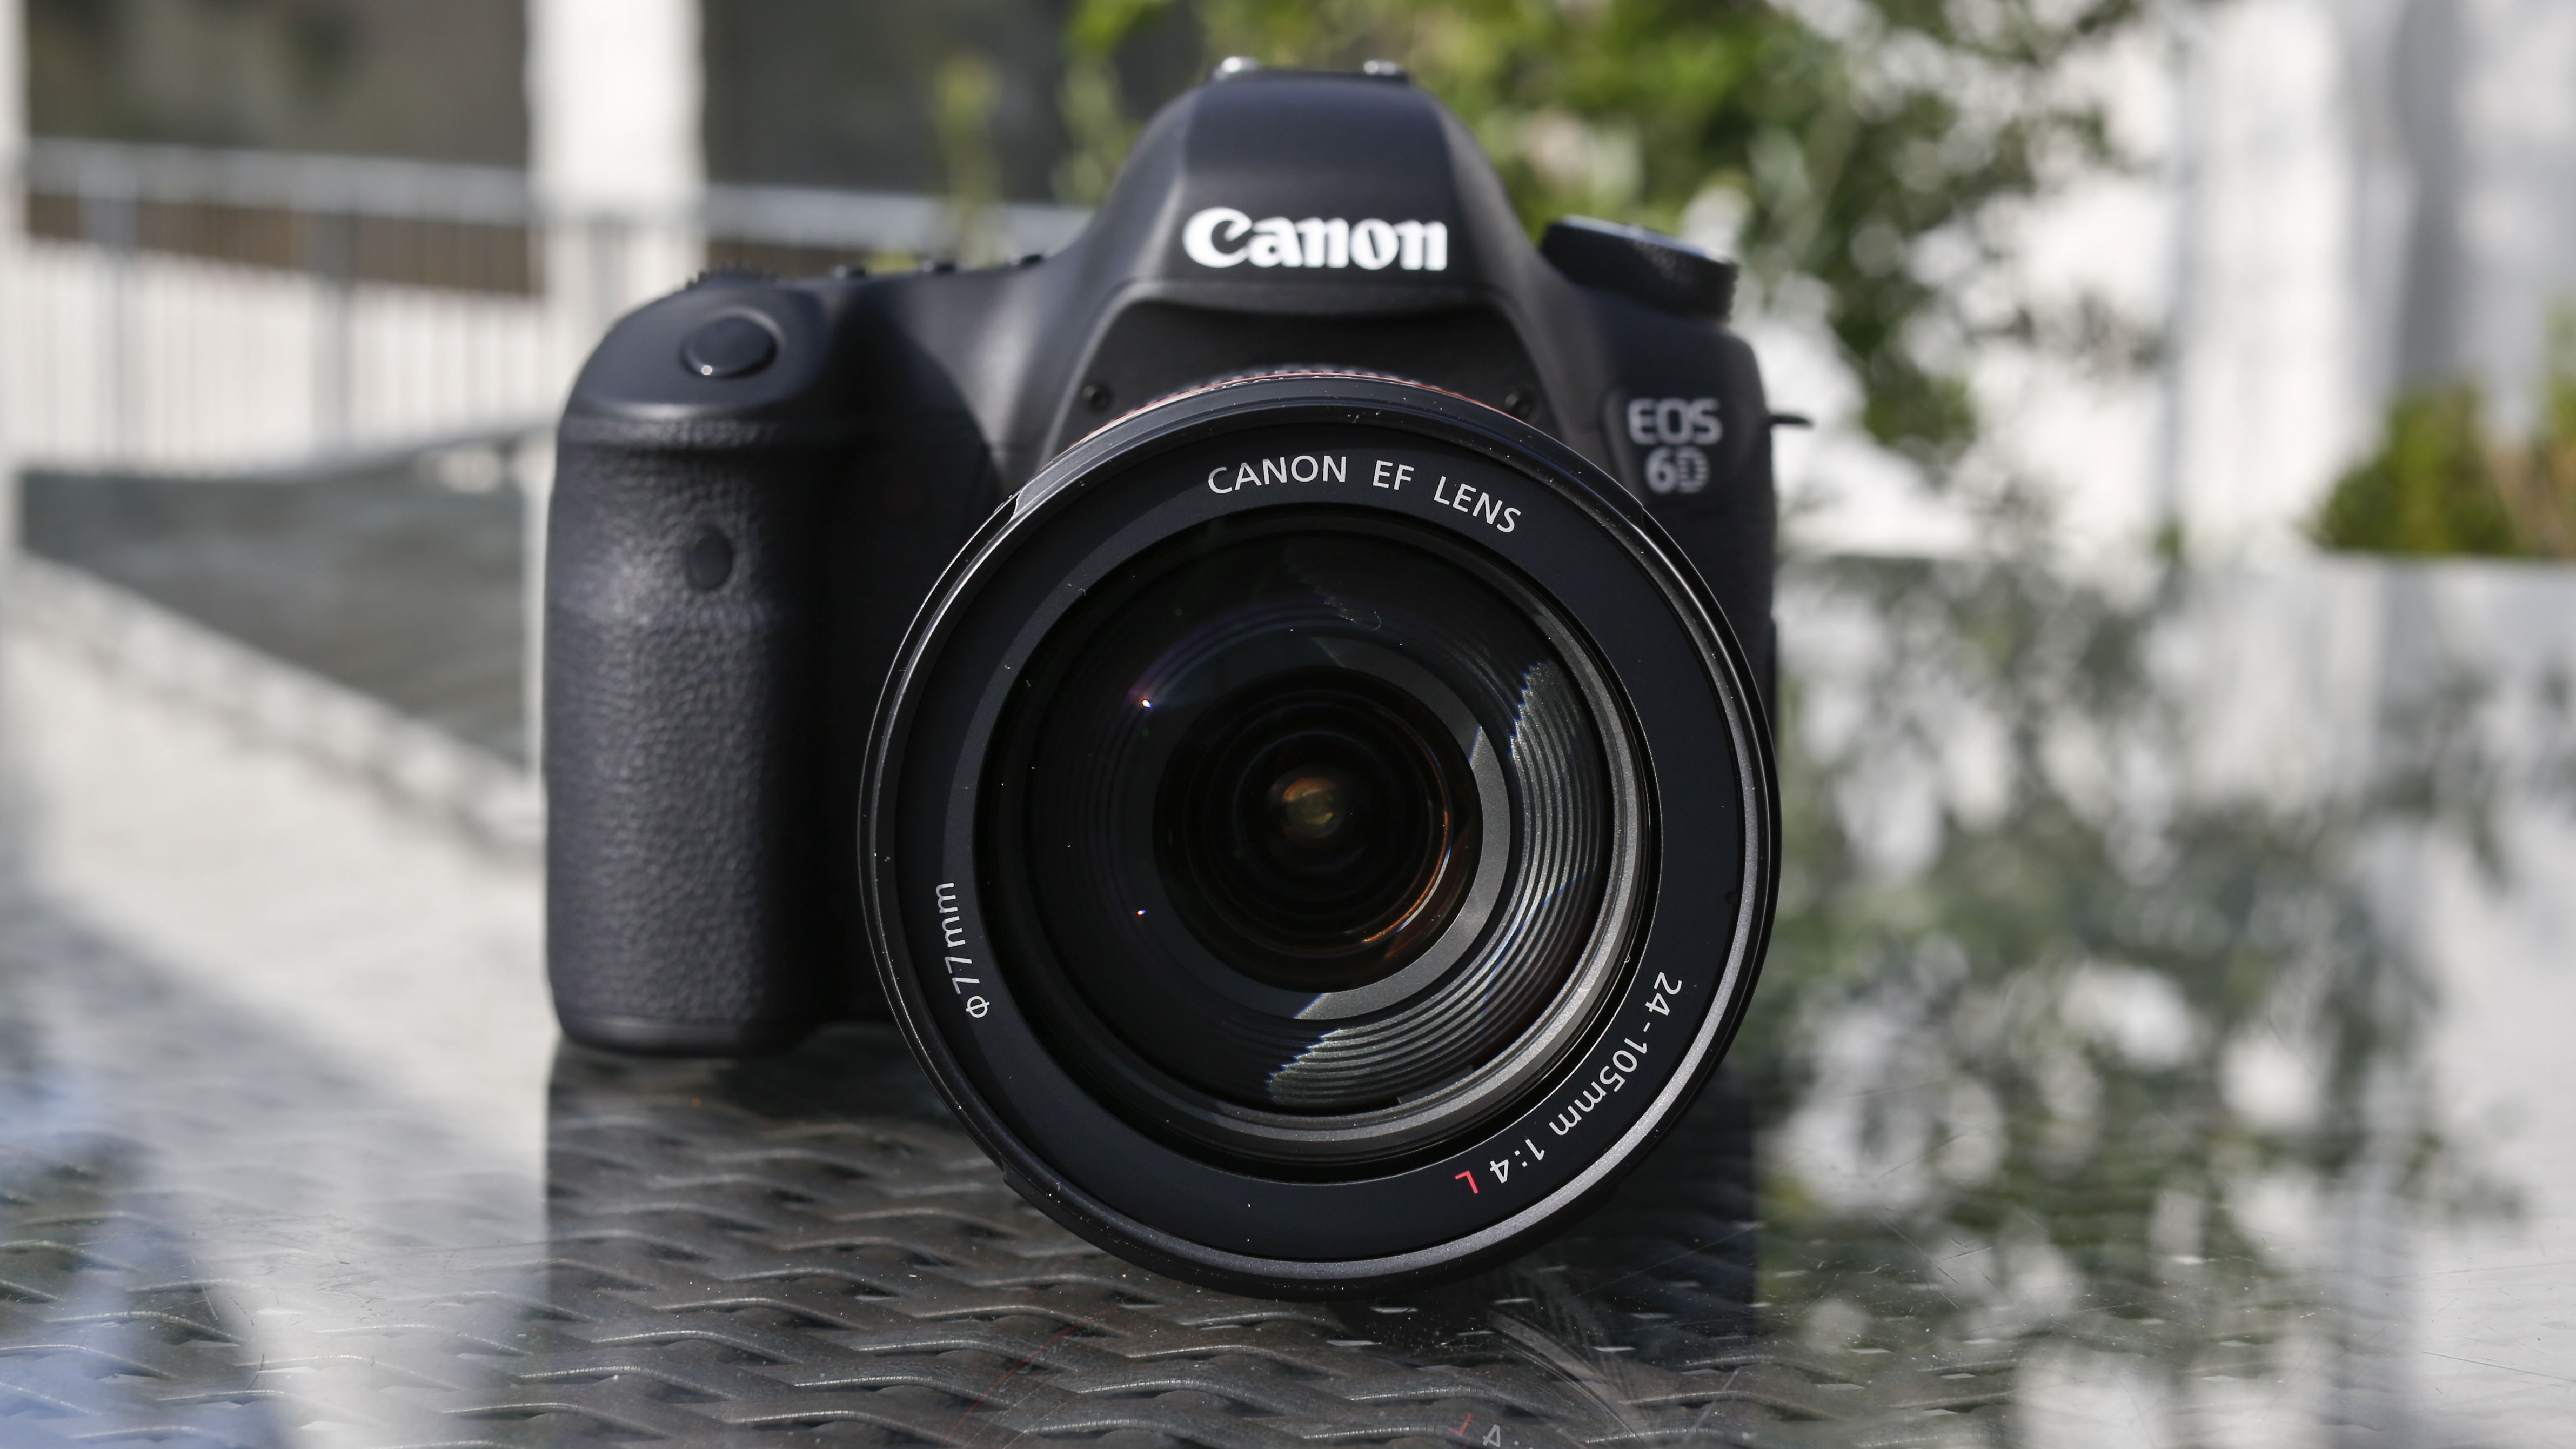 The Canon EOS 6D DSLR on a glass table